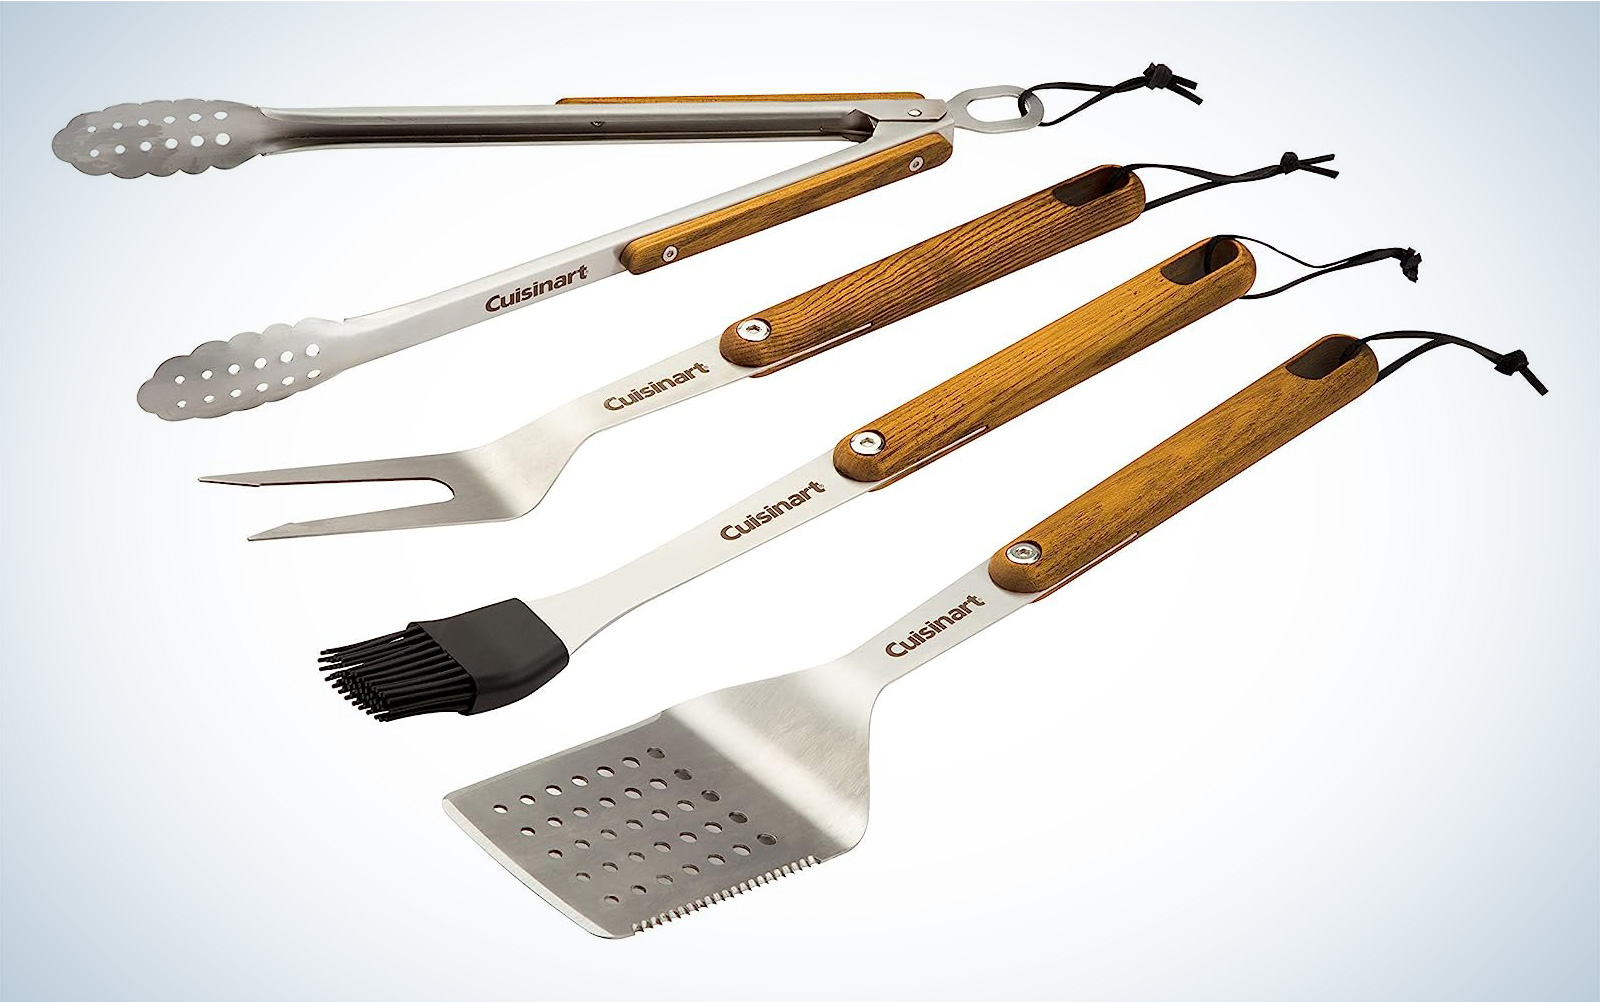 The best grill tool sets for 2023